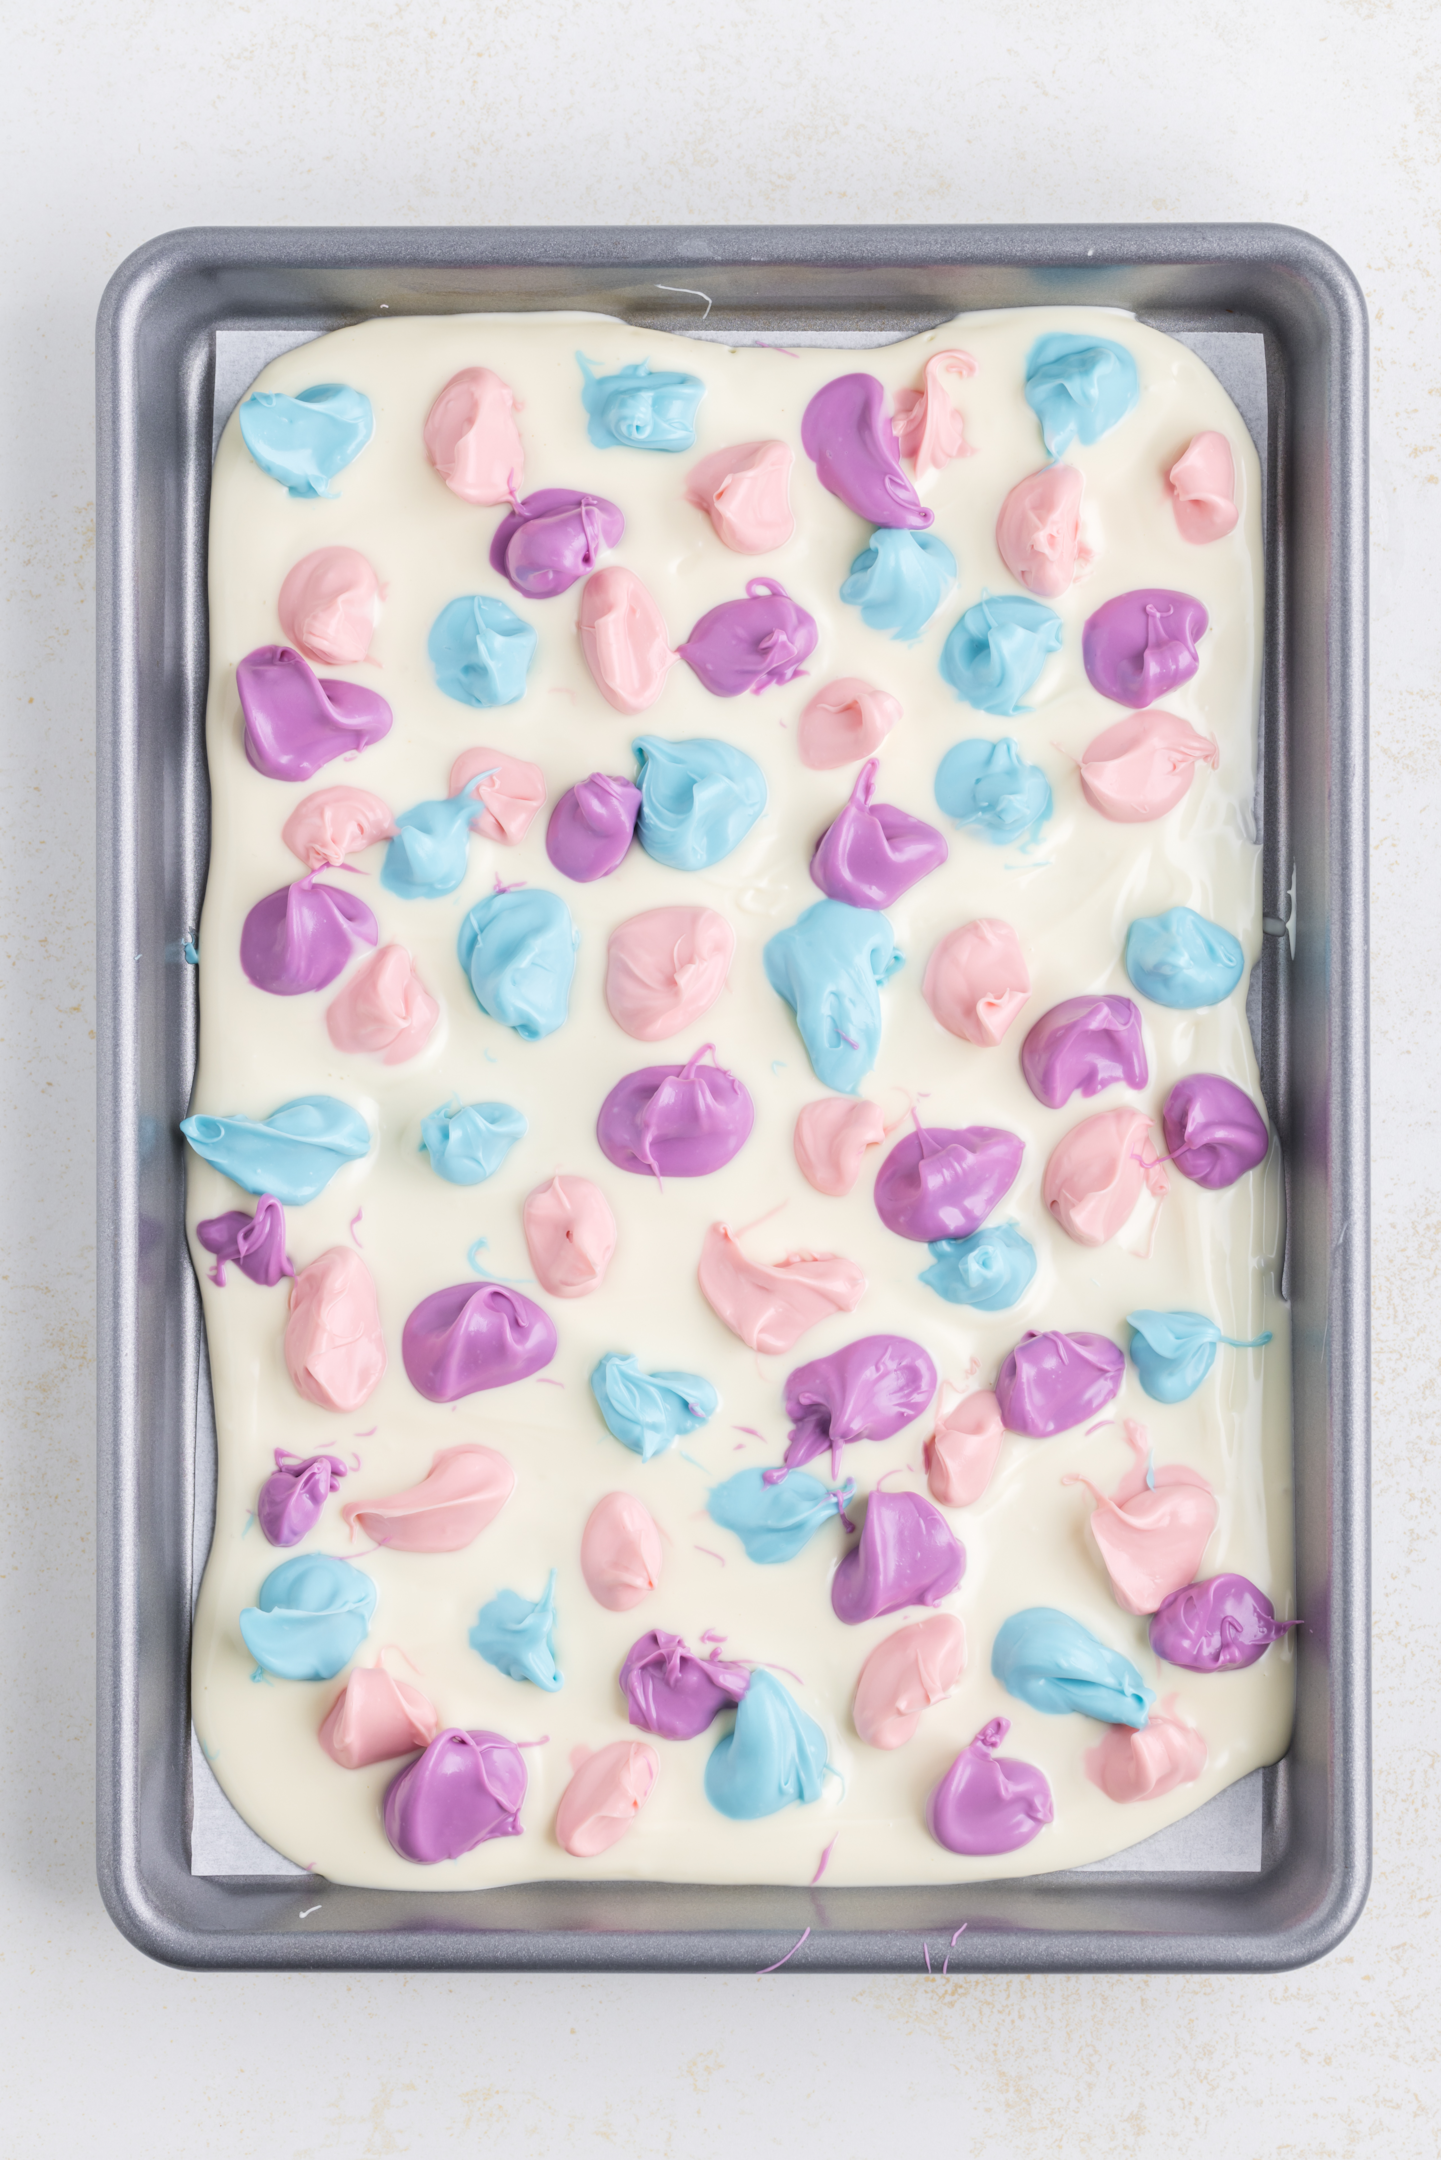 dollops of candy melts on top of white chocolate